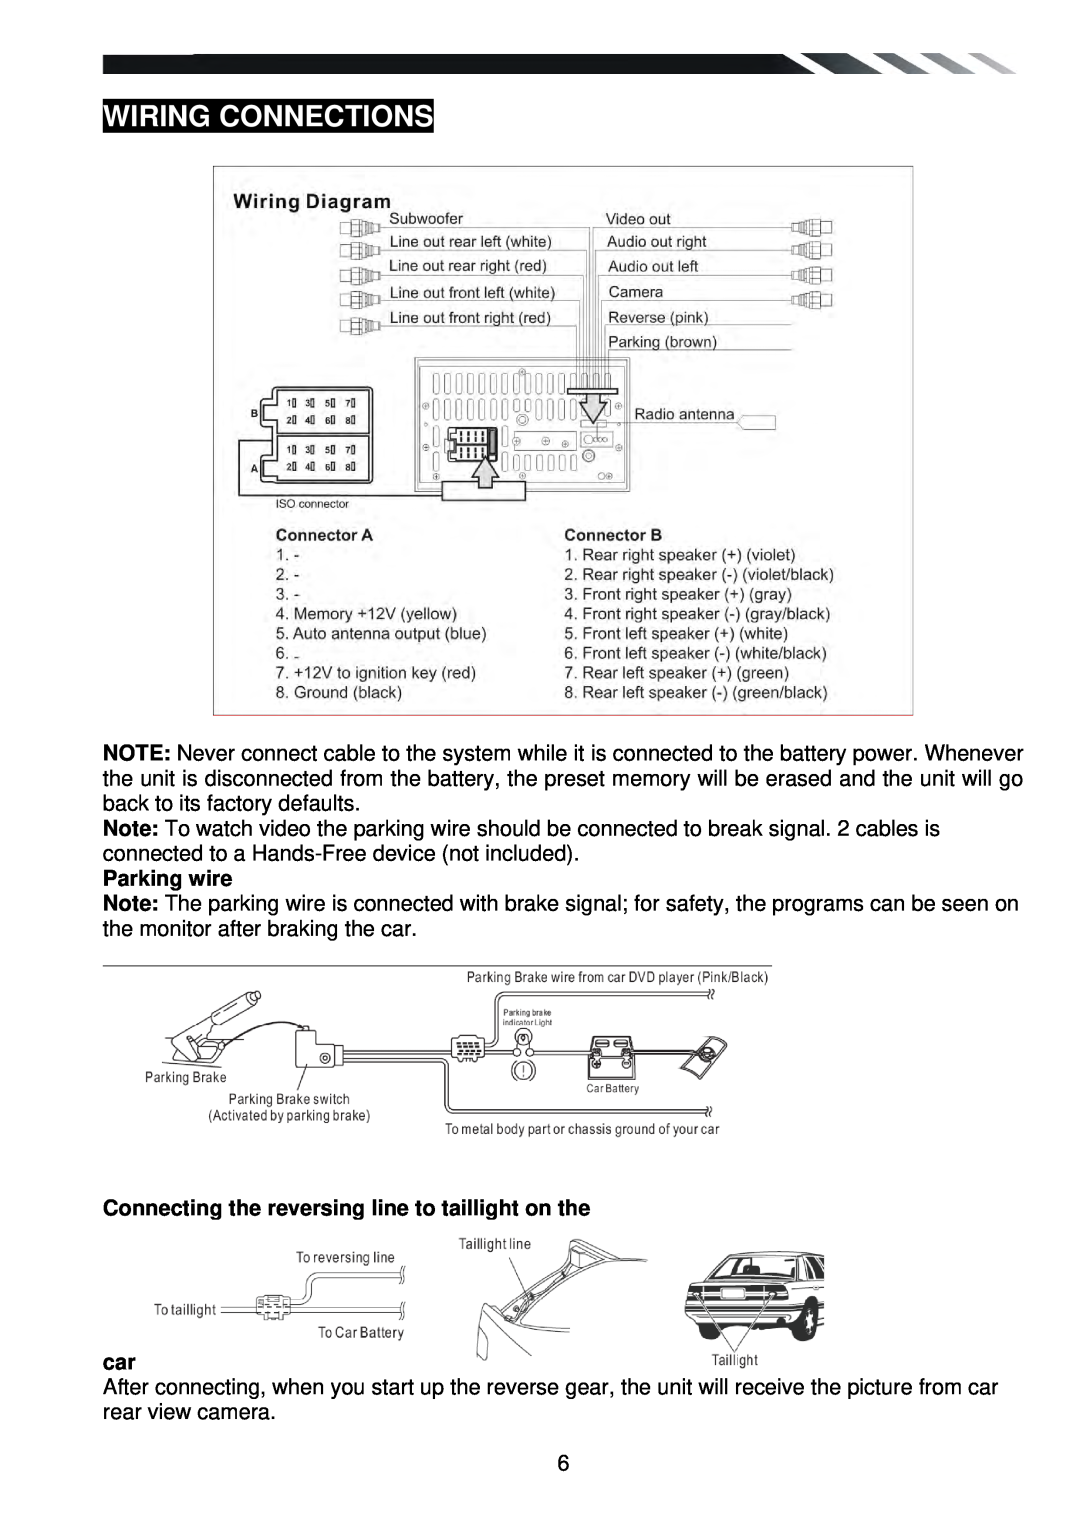 Power Acoustik PTID-6250B owner manual Wiring Connections, Parking wire, Connecting the reversing line to taillight on the 